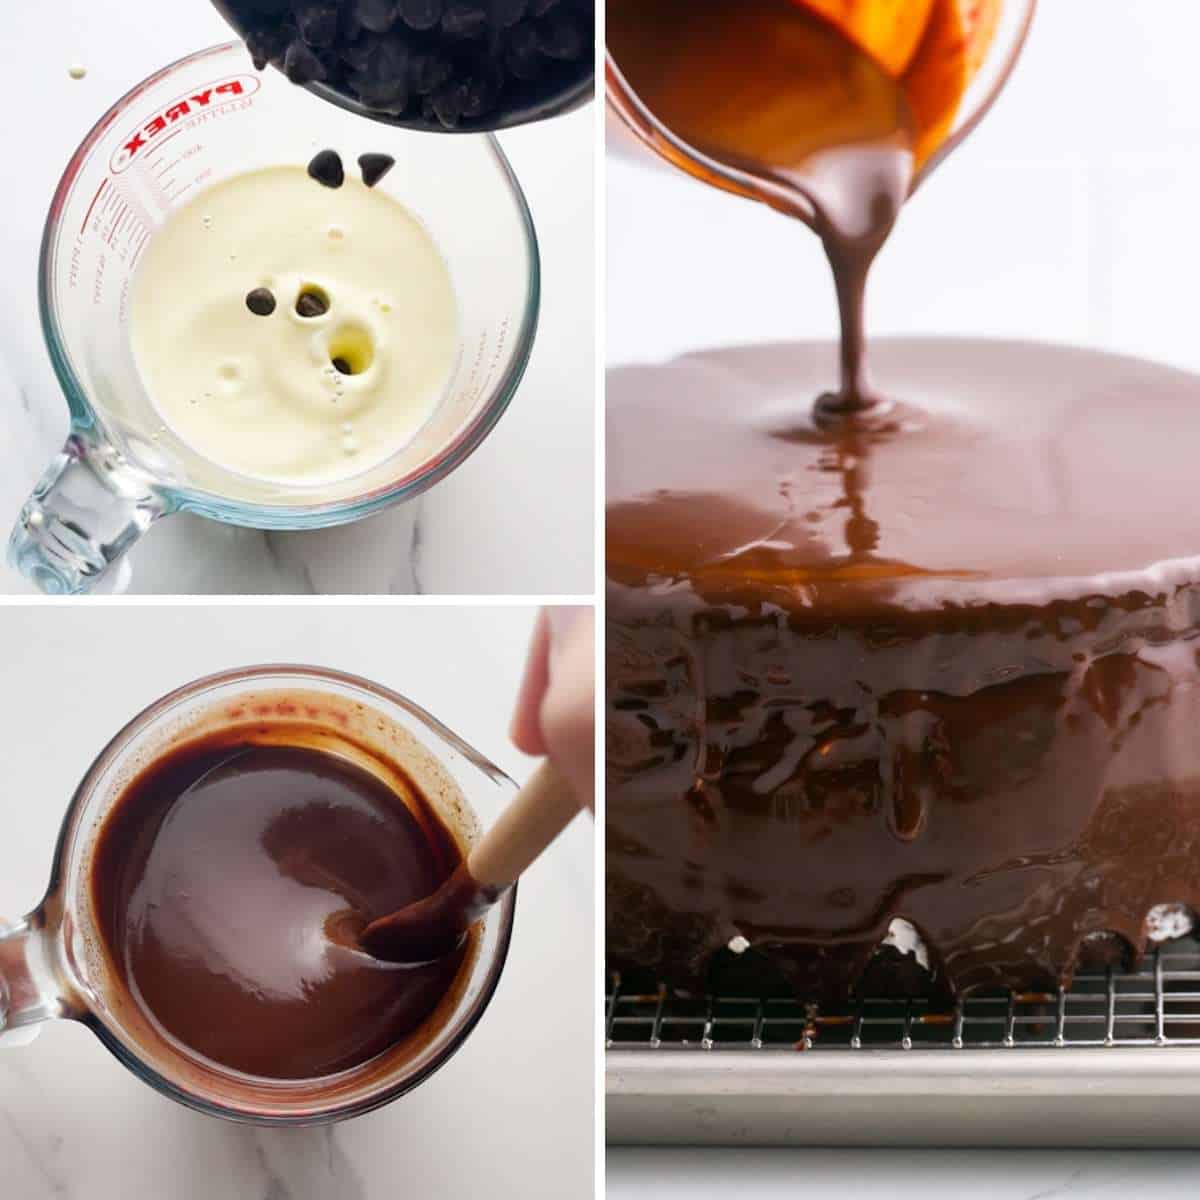 collage of three images showing how to make chocolate ganache and pour it over a ding dong cake.